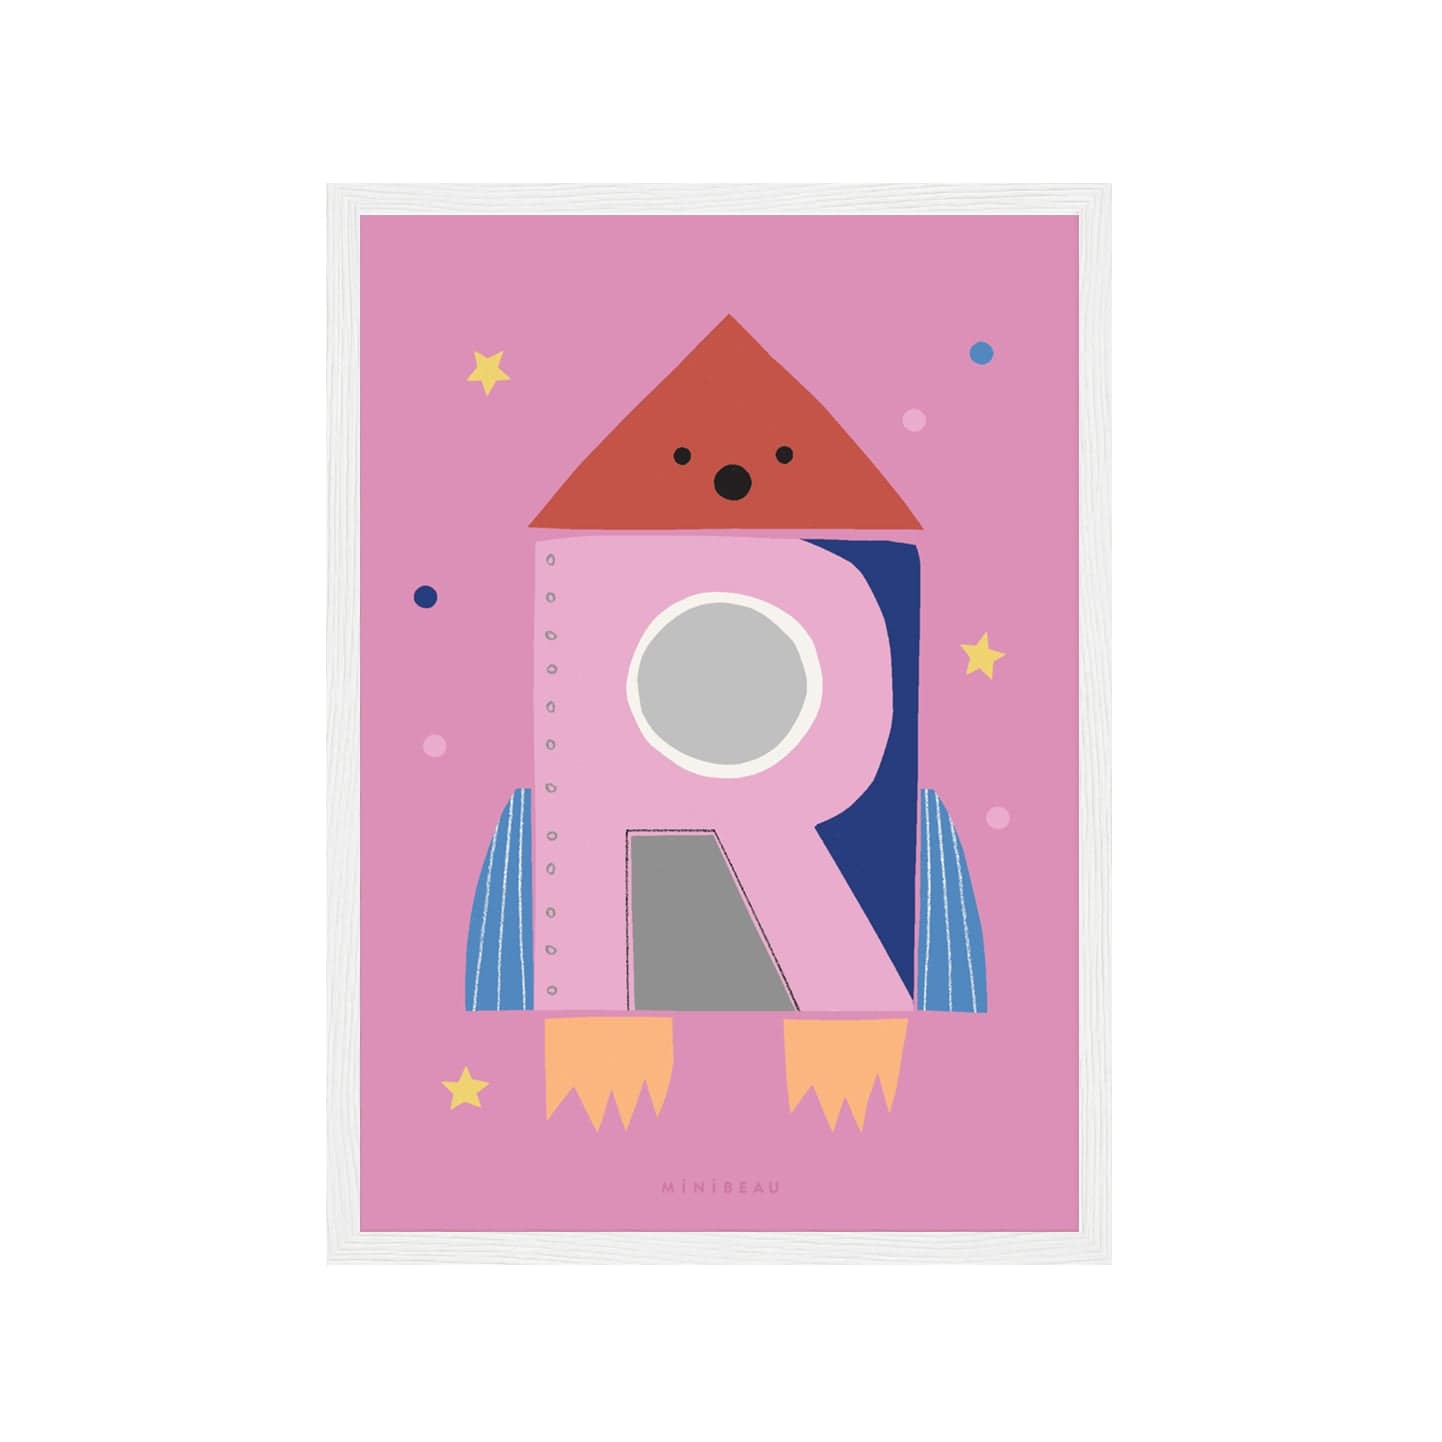 Art print in white frame. Our Happy Alphabet 'R' Art Print shows a shocked rocket lasting of to space with a large pink R on it creating a porthole. On a pink background with coloured dots and yellow stars.